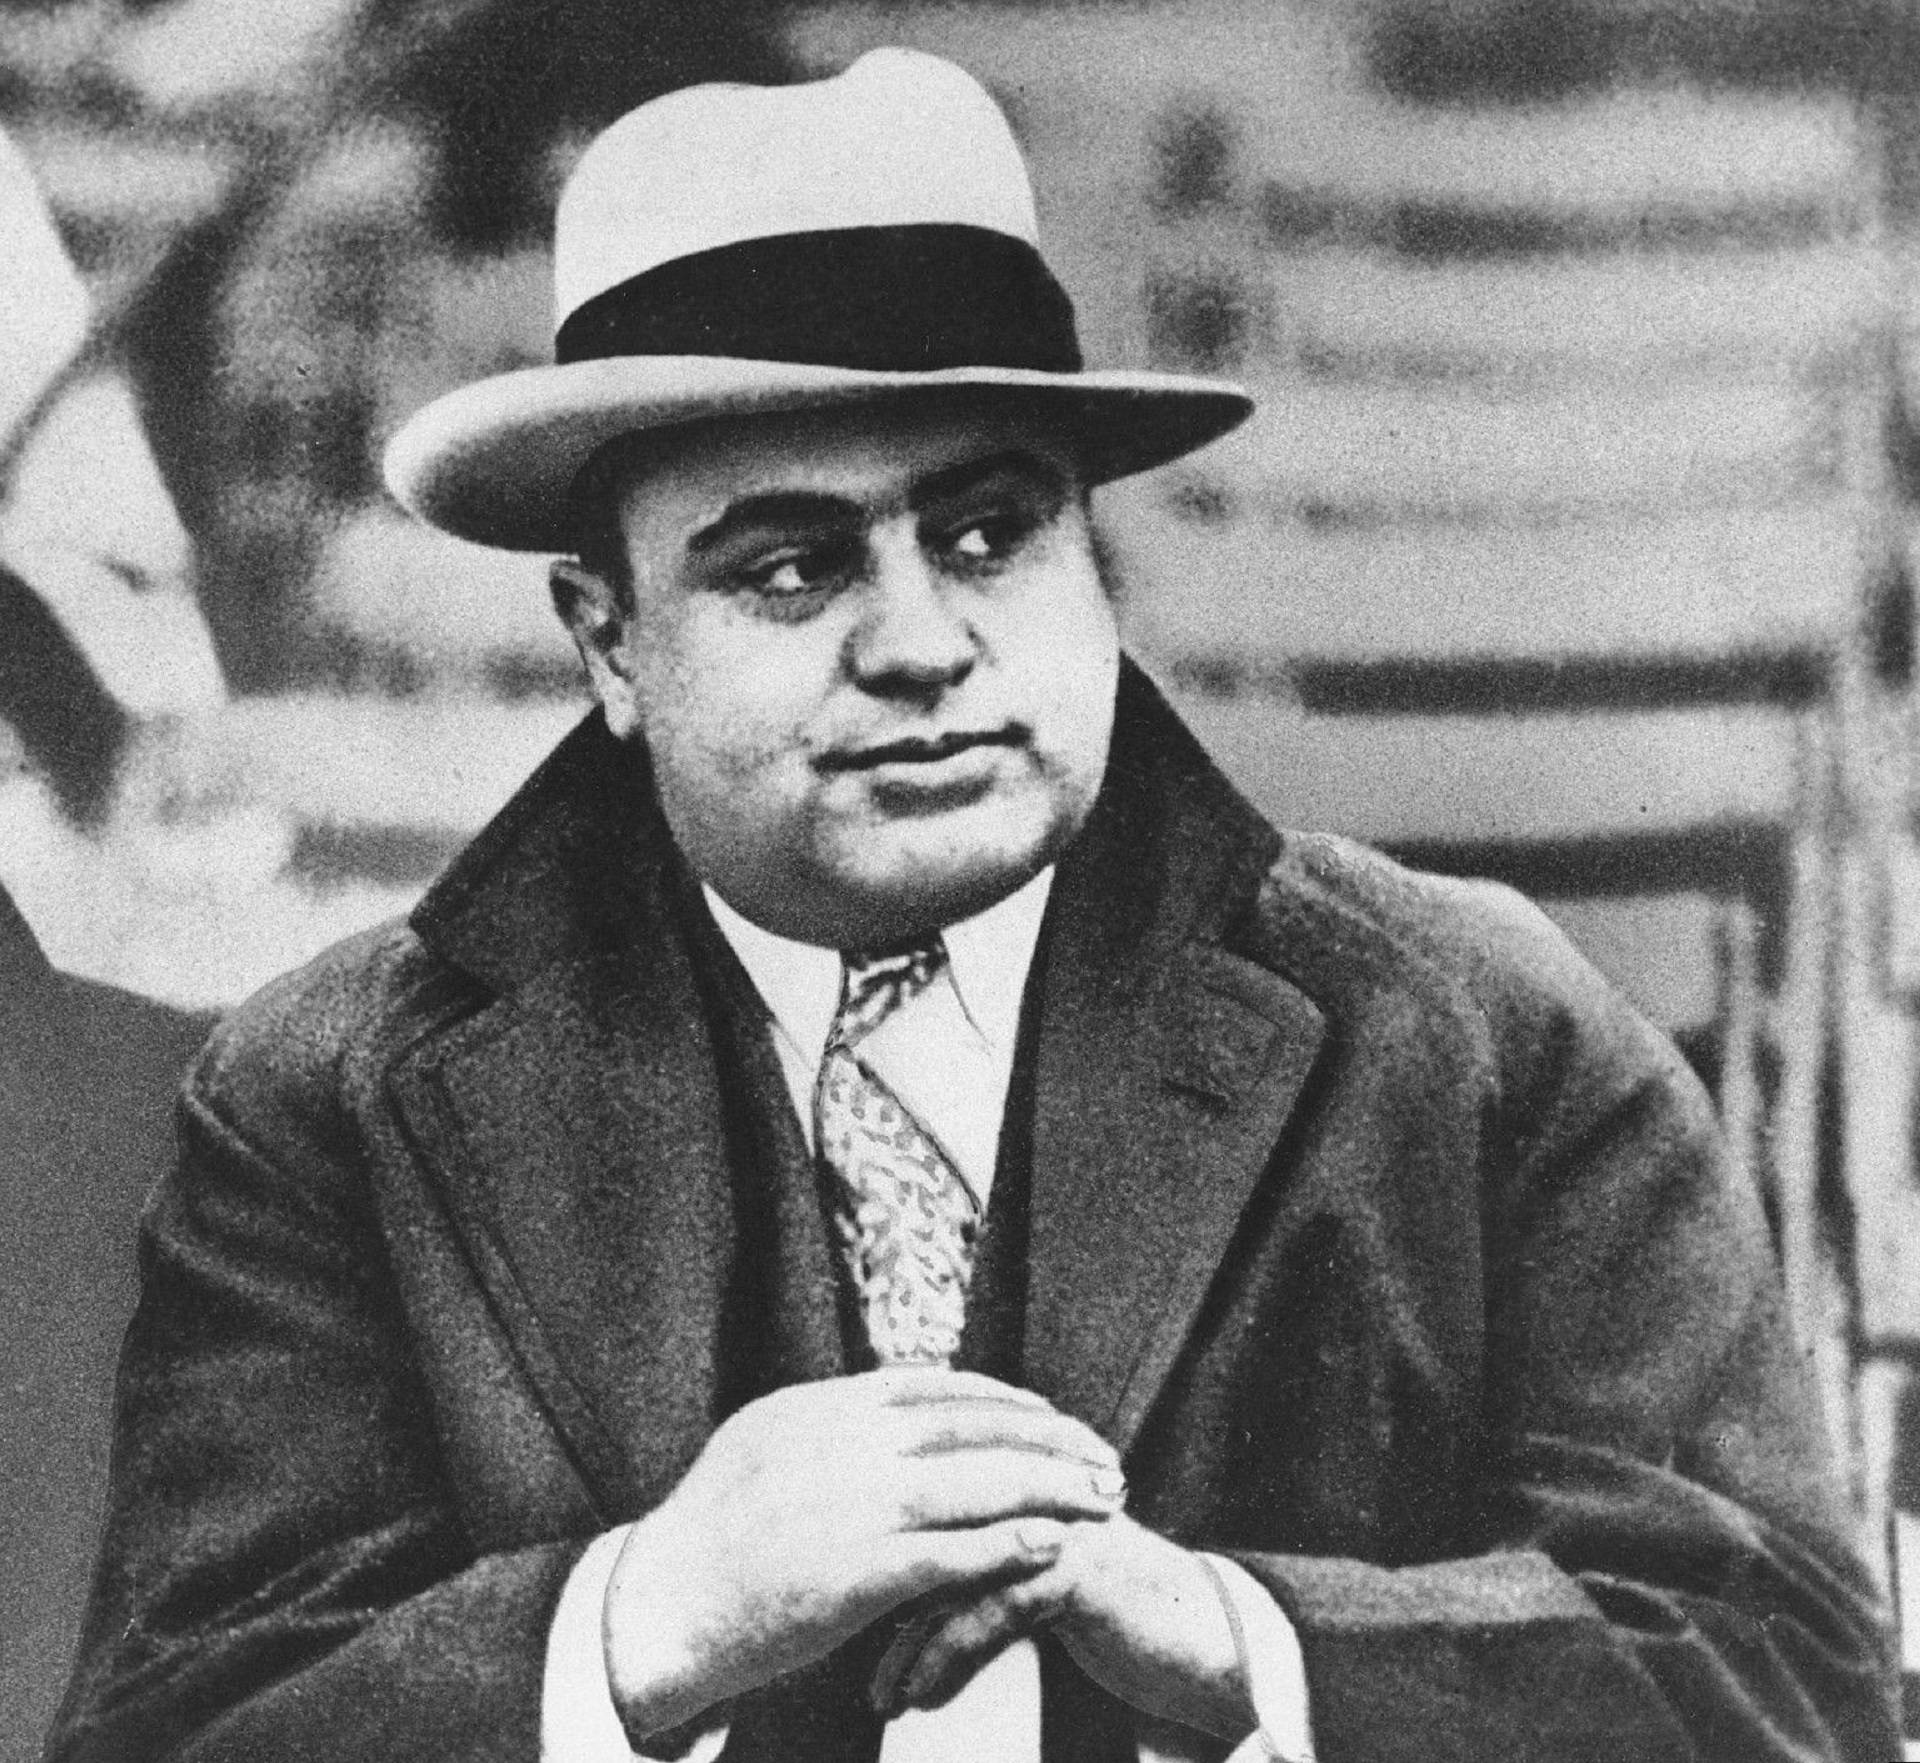 The Notorious American Gangster - Al Capone Background